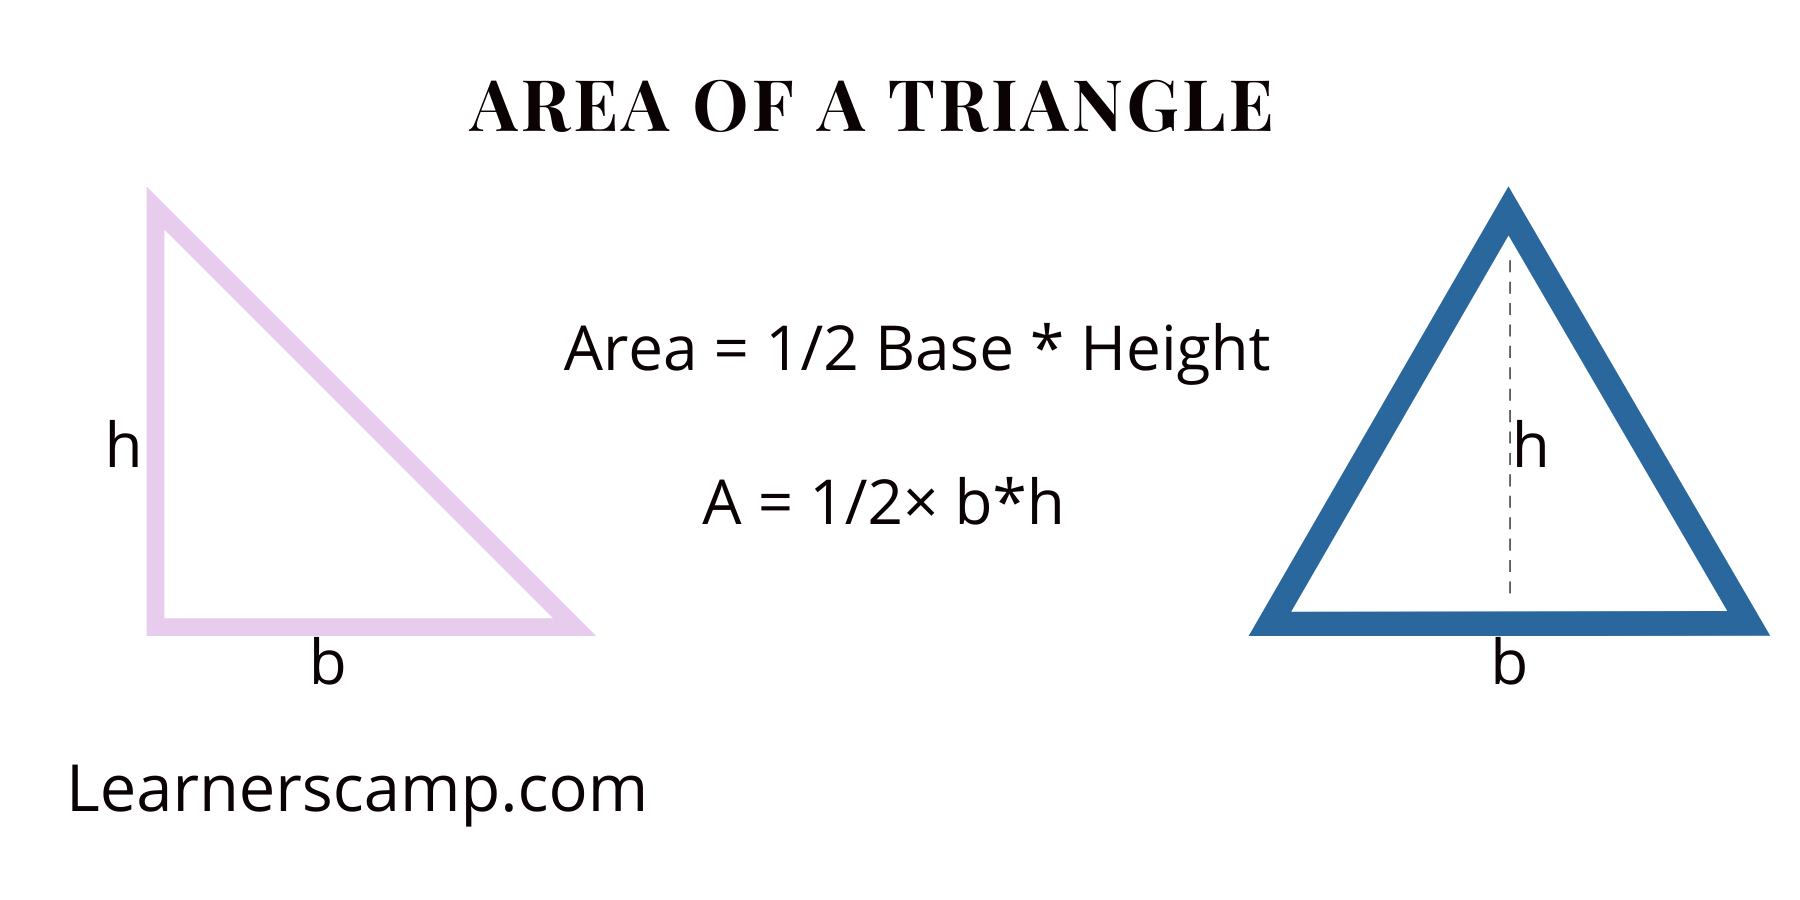 How to Find the Area of a Triangle